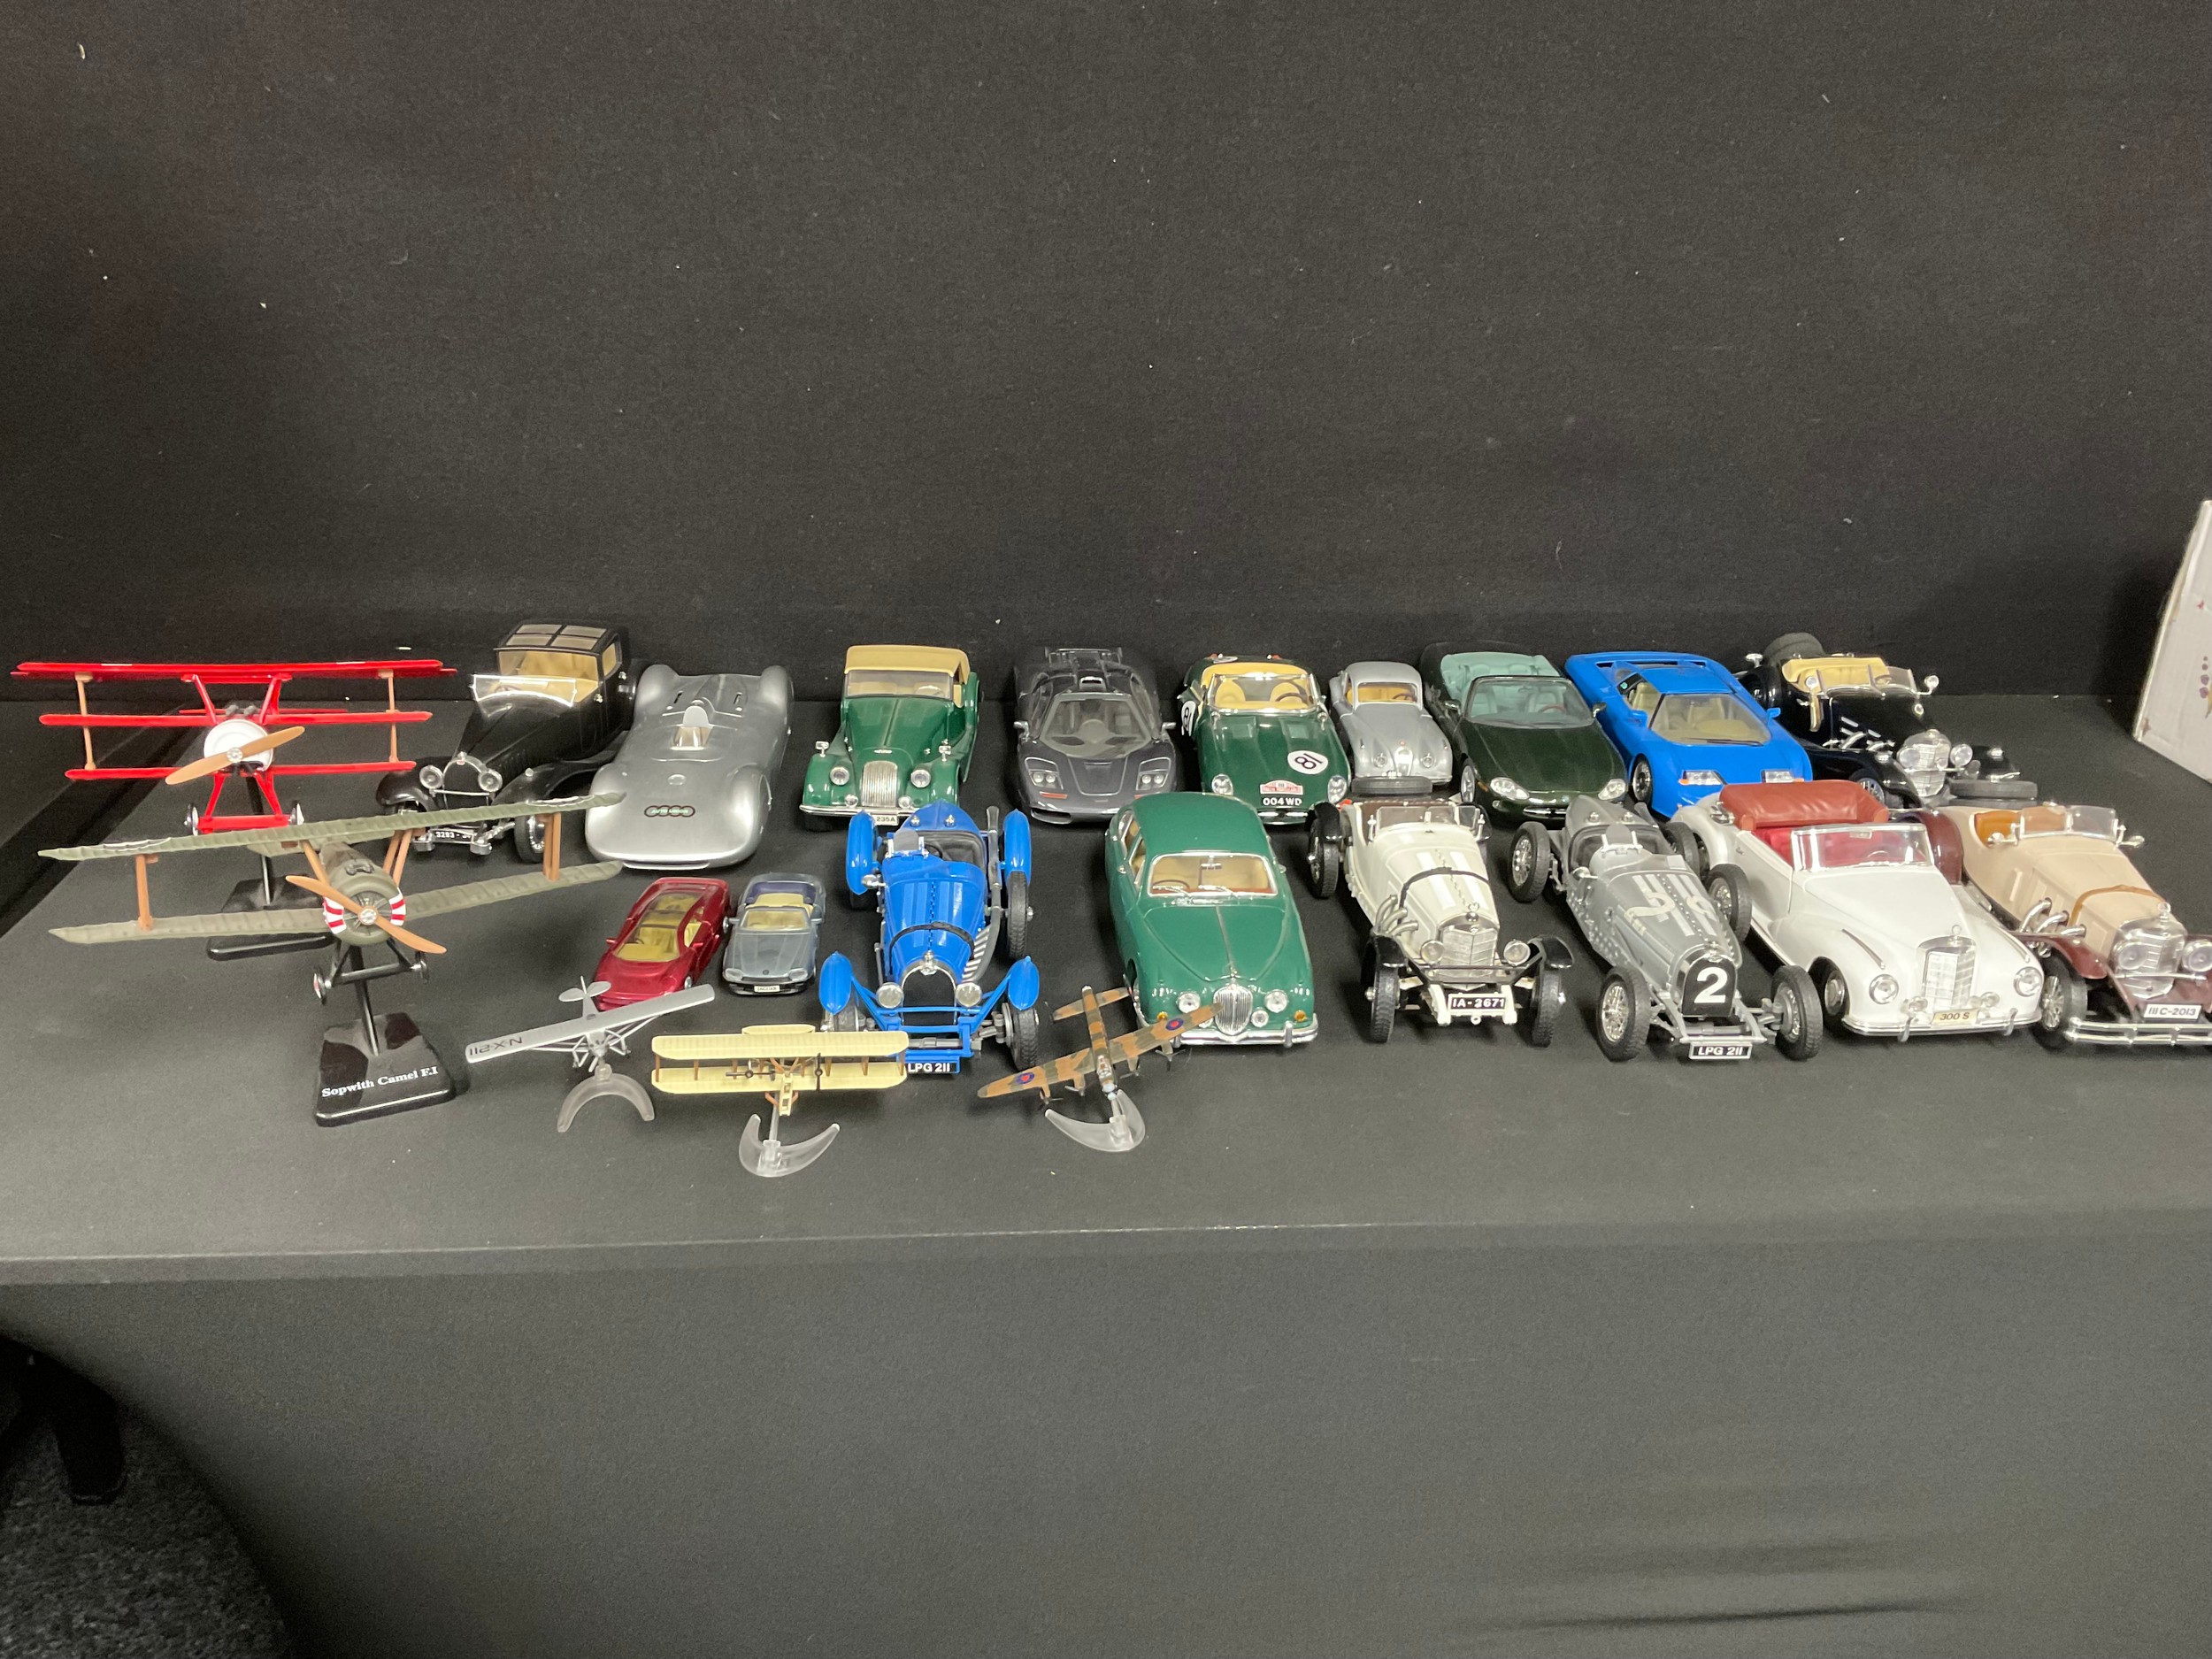 Toys & Juvenalia - a collection of unboxed model cars and aviation related models, various